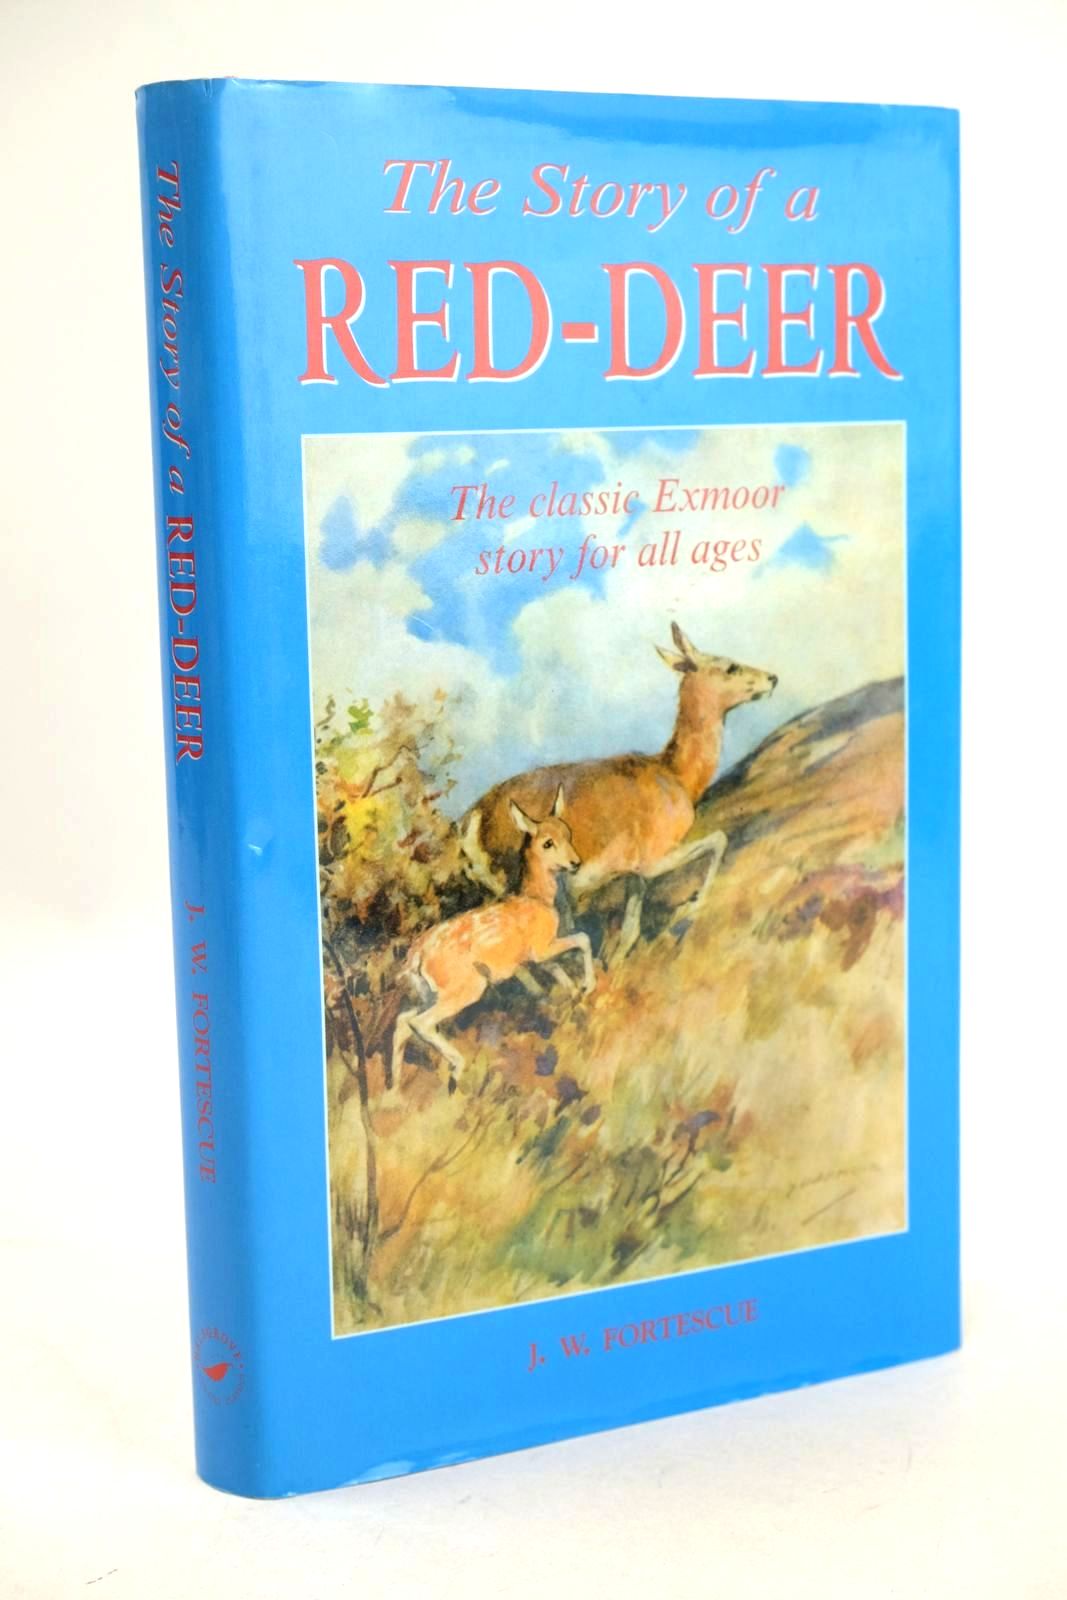 Photo of THE STORY OF A RED-DEER written by Fortescue, J.W. illustrated by Armour, G.D. published by Halsgrove (STOCK CODE: 1326541)  for sale by Stella & Rose's Books